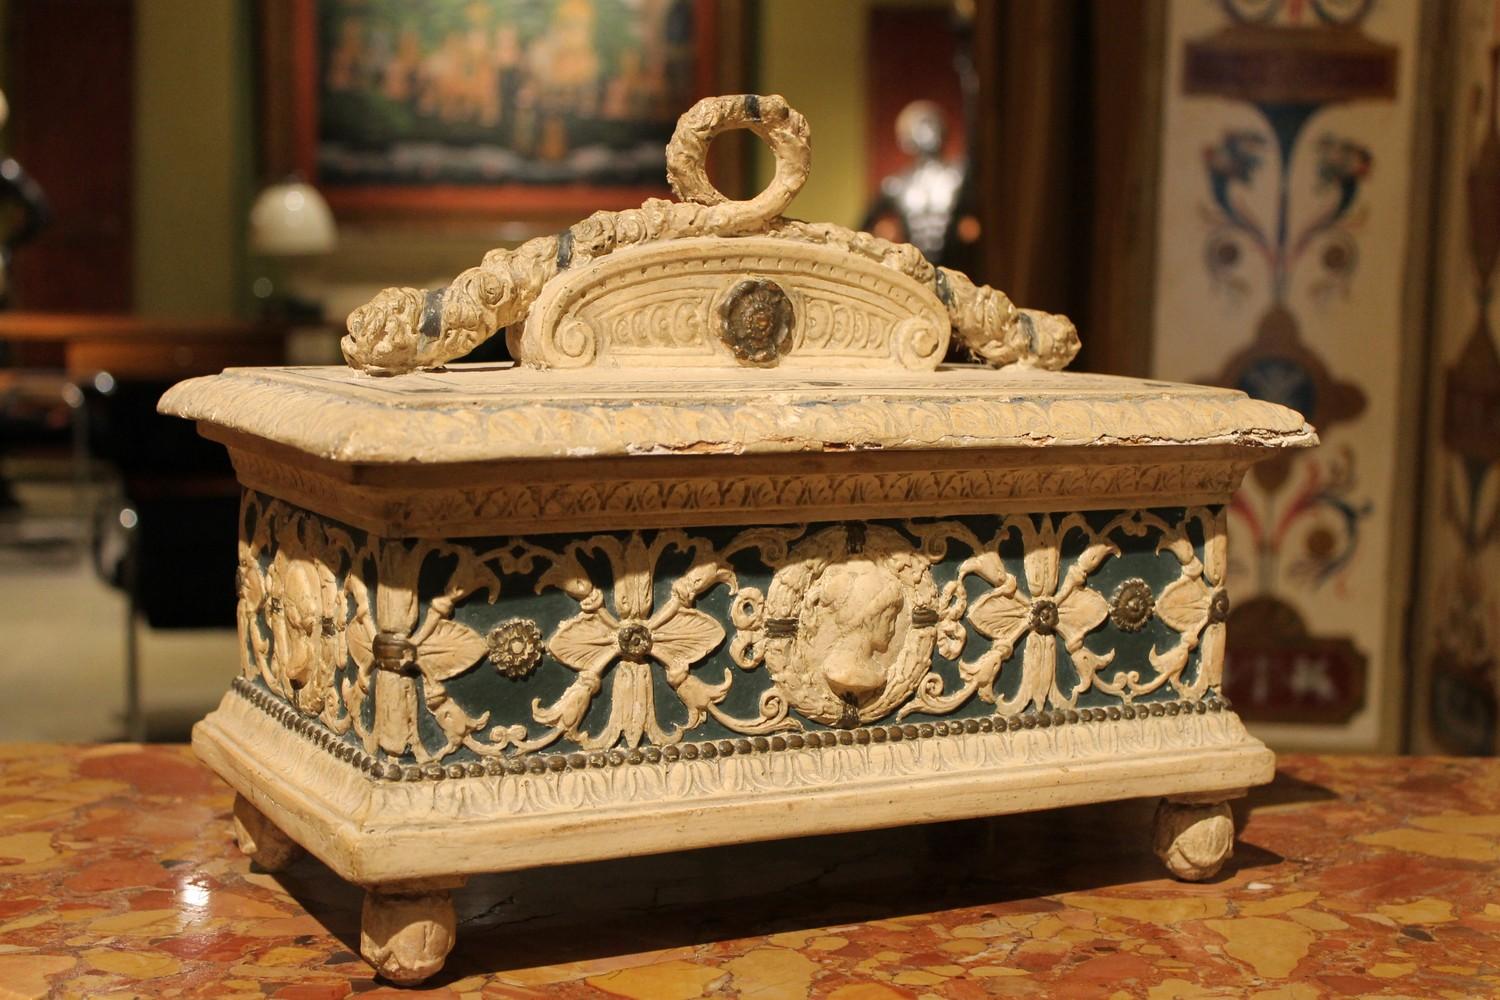 Italian 19th Century Renaissance Style Wood Lacquer and Painted Gesso Lidded Box For Sale 3